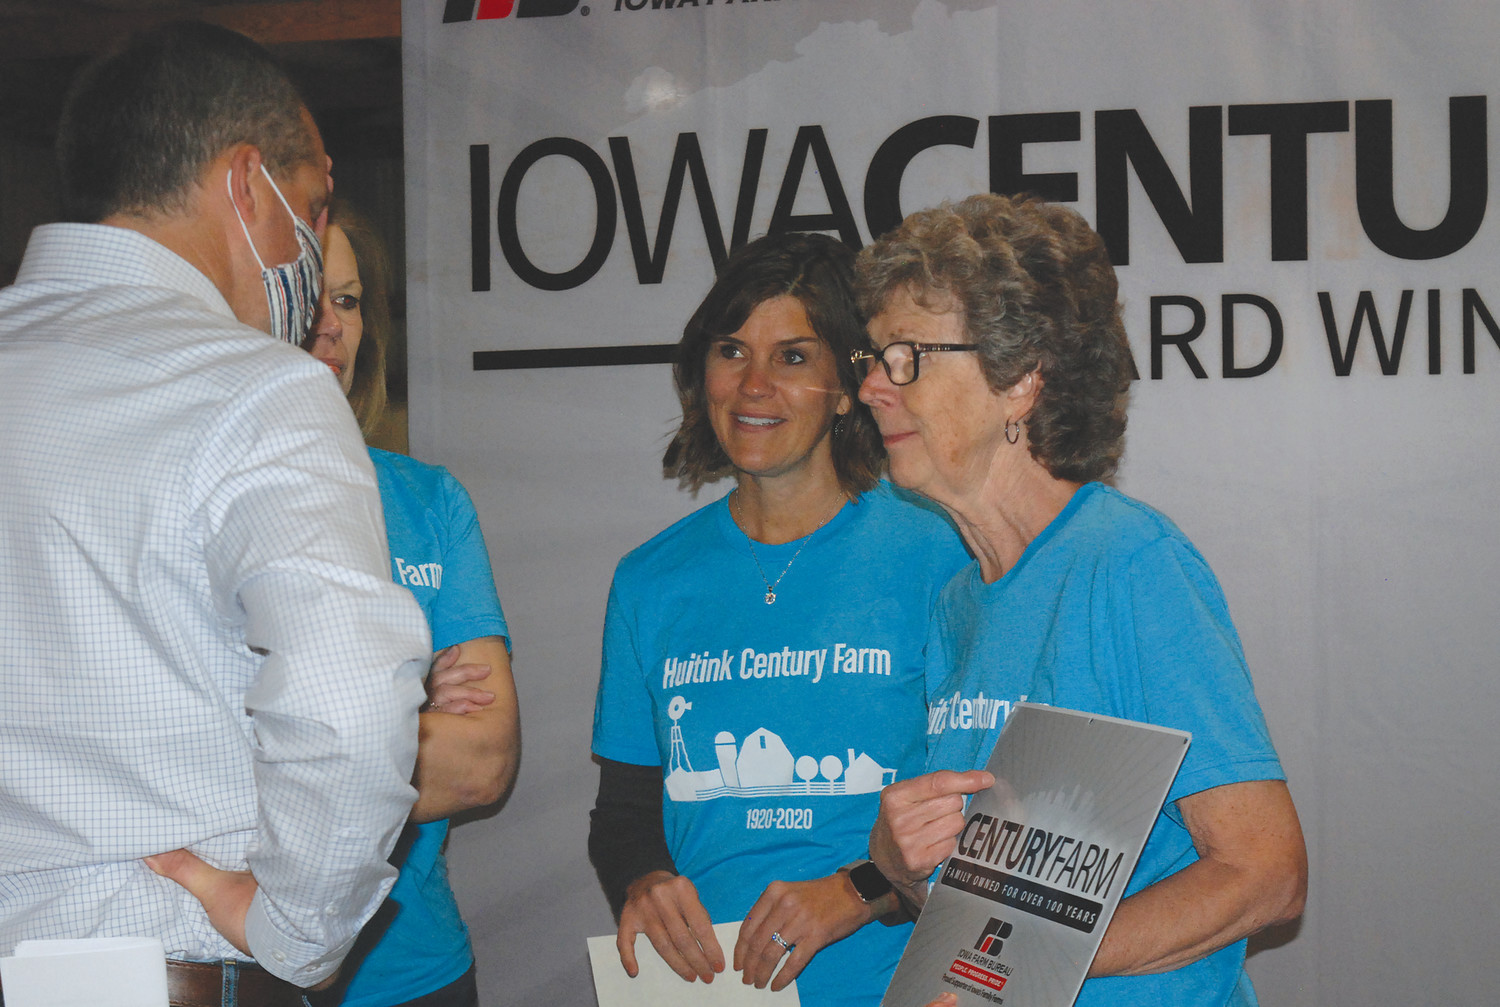 CENTURY FARM -- Iowa Secretary of Agriculture Mike Naig is pictured visiting with members of the Huitink family from Sioux County. Naig and Iowa Farm Bureau Federation President Craig Hill presented Century Farm Awards to two Northwest Iowa families last week at the Palo Alto County Fairgrounds in Emmetsburg.            --Jane Whitmore photo